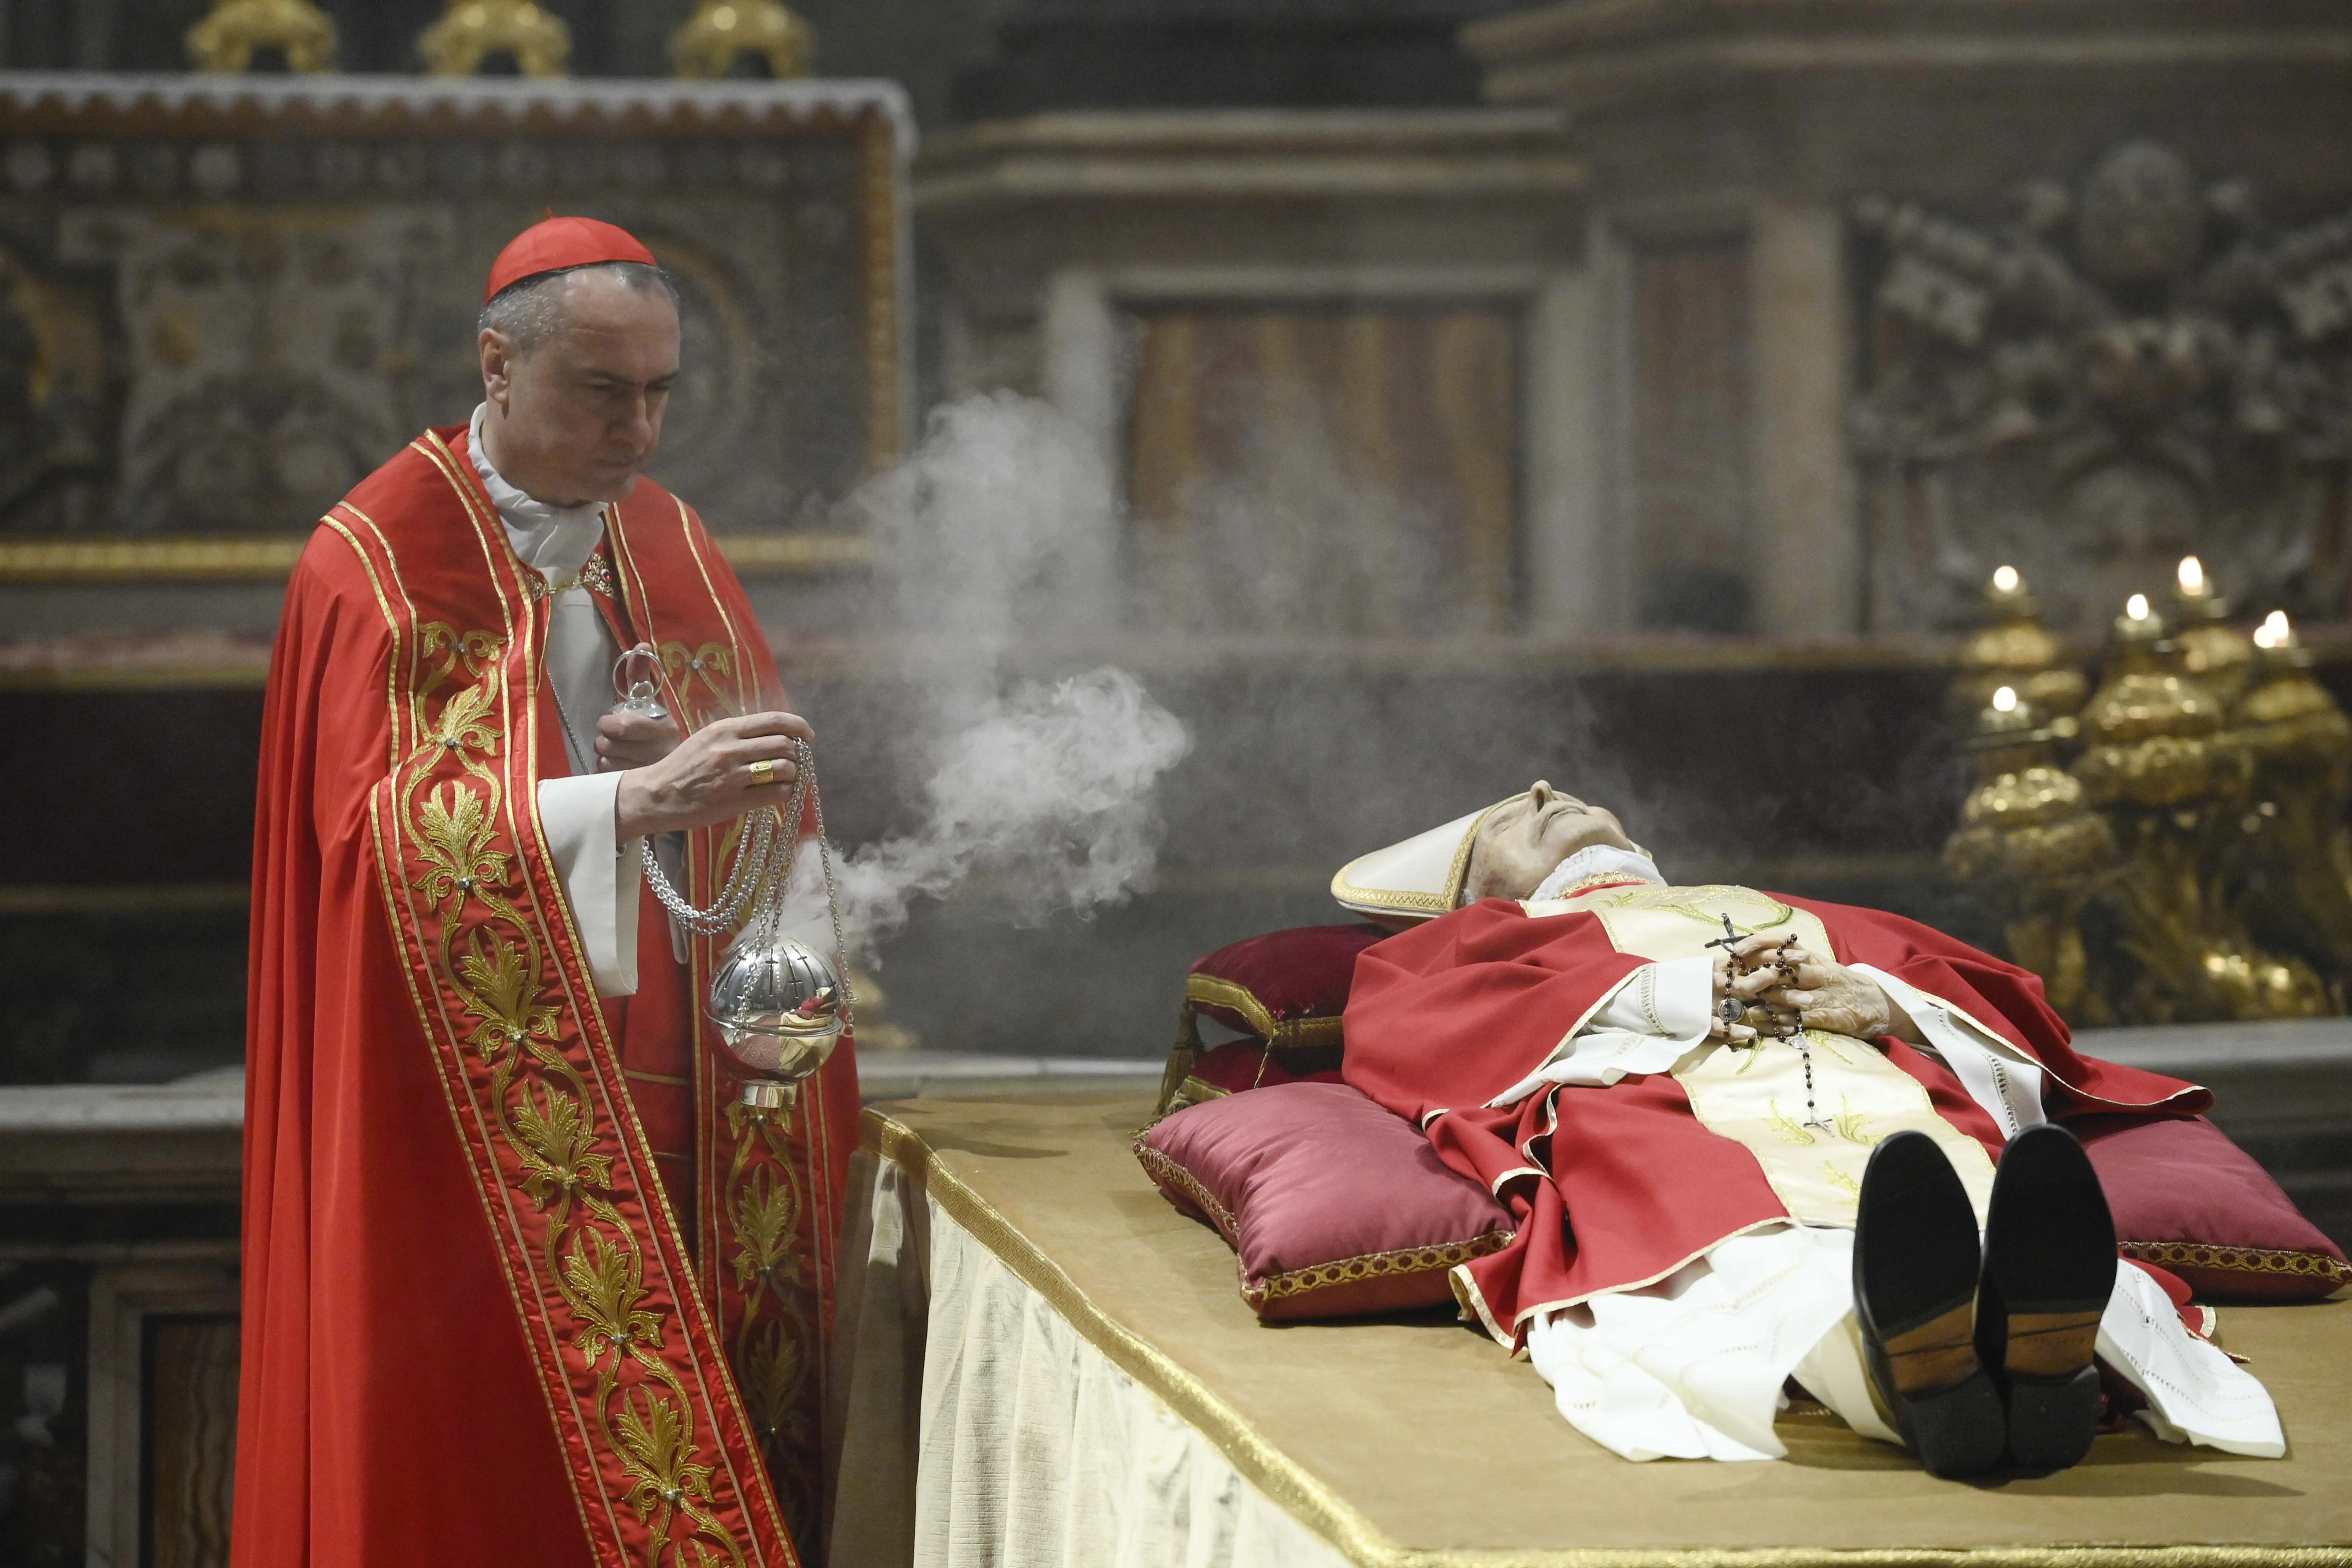 Cardinal Mauro Gambetti, the archpriest of St. Peter’s Basilica, presided over a brief ritual upon the arrival of Benedict XVI’s body in St. Peter's Basilica on Jan. 2, 2023, sprinkling the body with holy water and offering prayers for the repose of his soul.?w=200&h=150